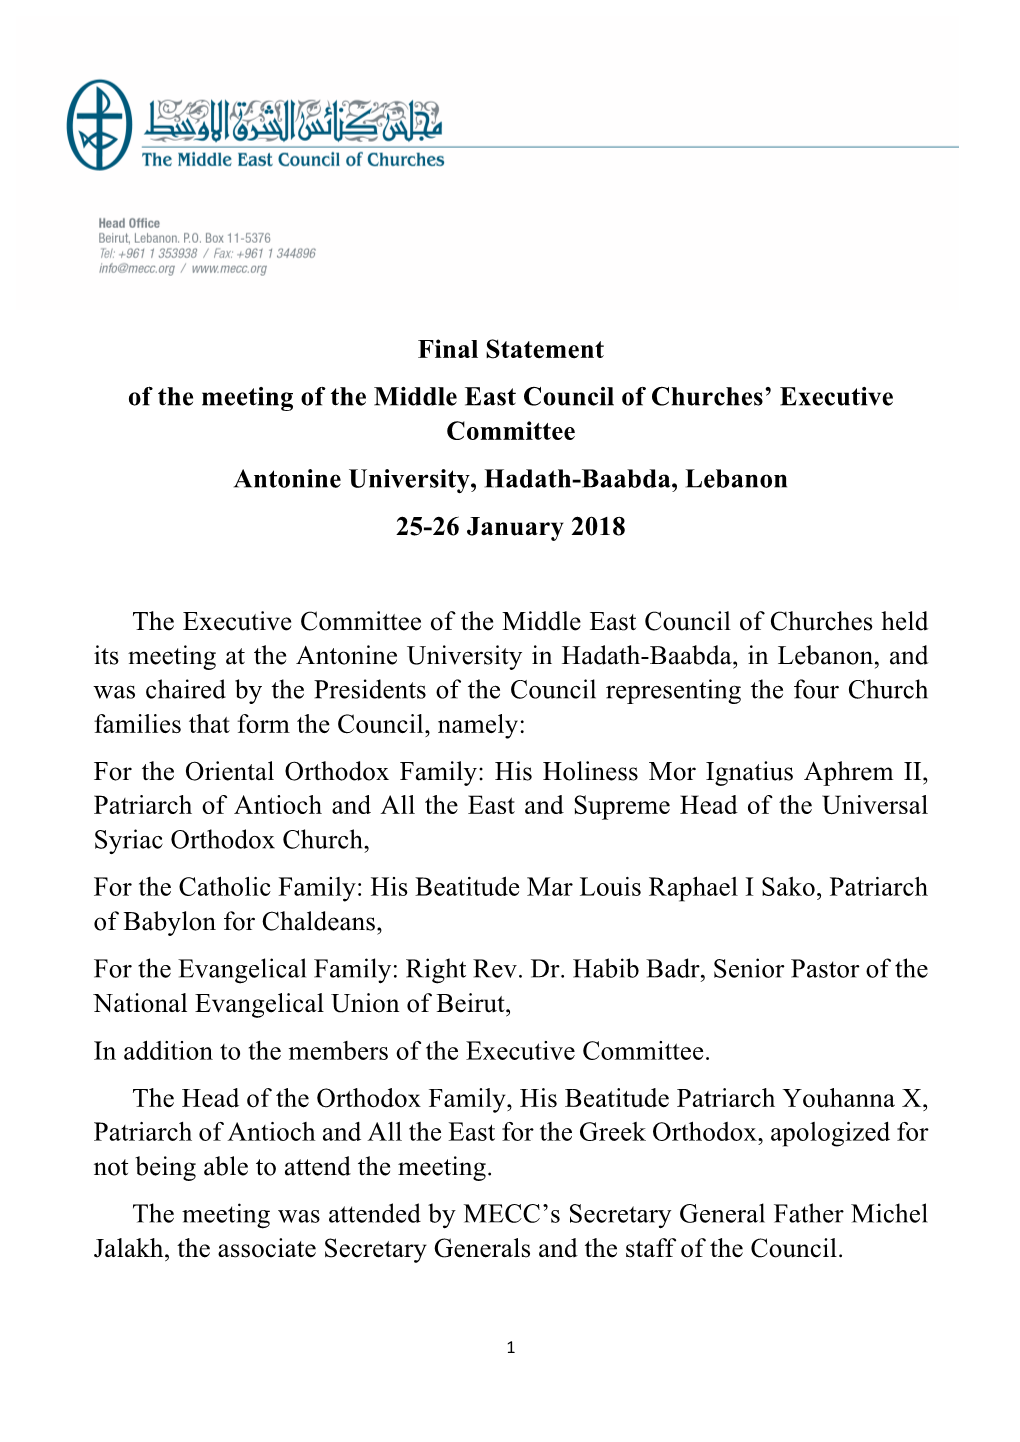 Final Statement of the Meeting of the Middle East Council of Churches’ Executive Committee Antonine University, Hadath-Baabda, Lebanon 25-26 January 2018